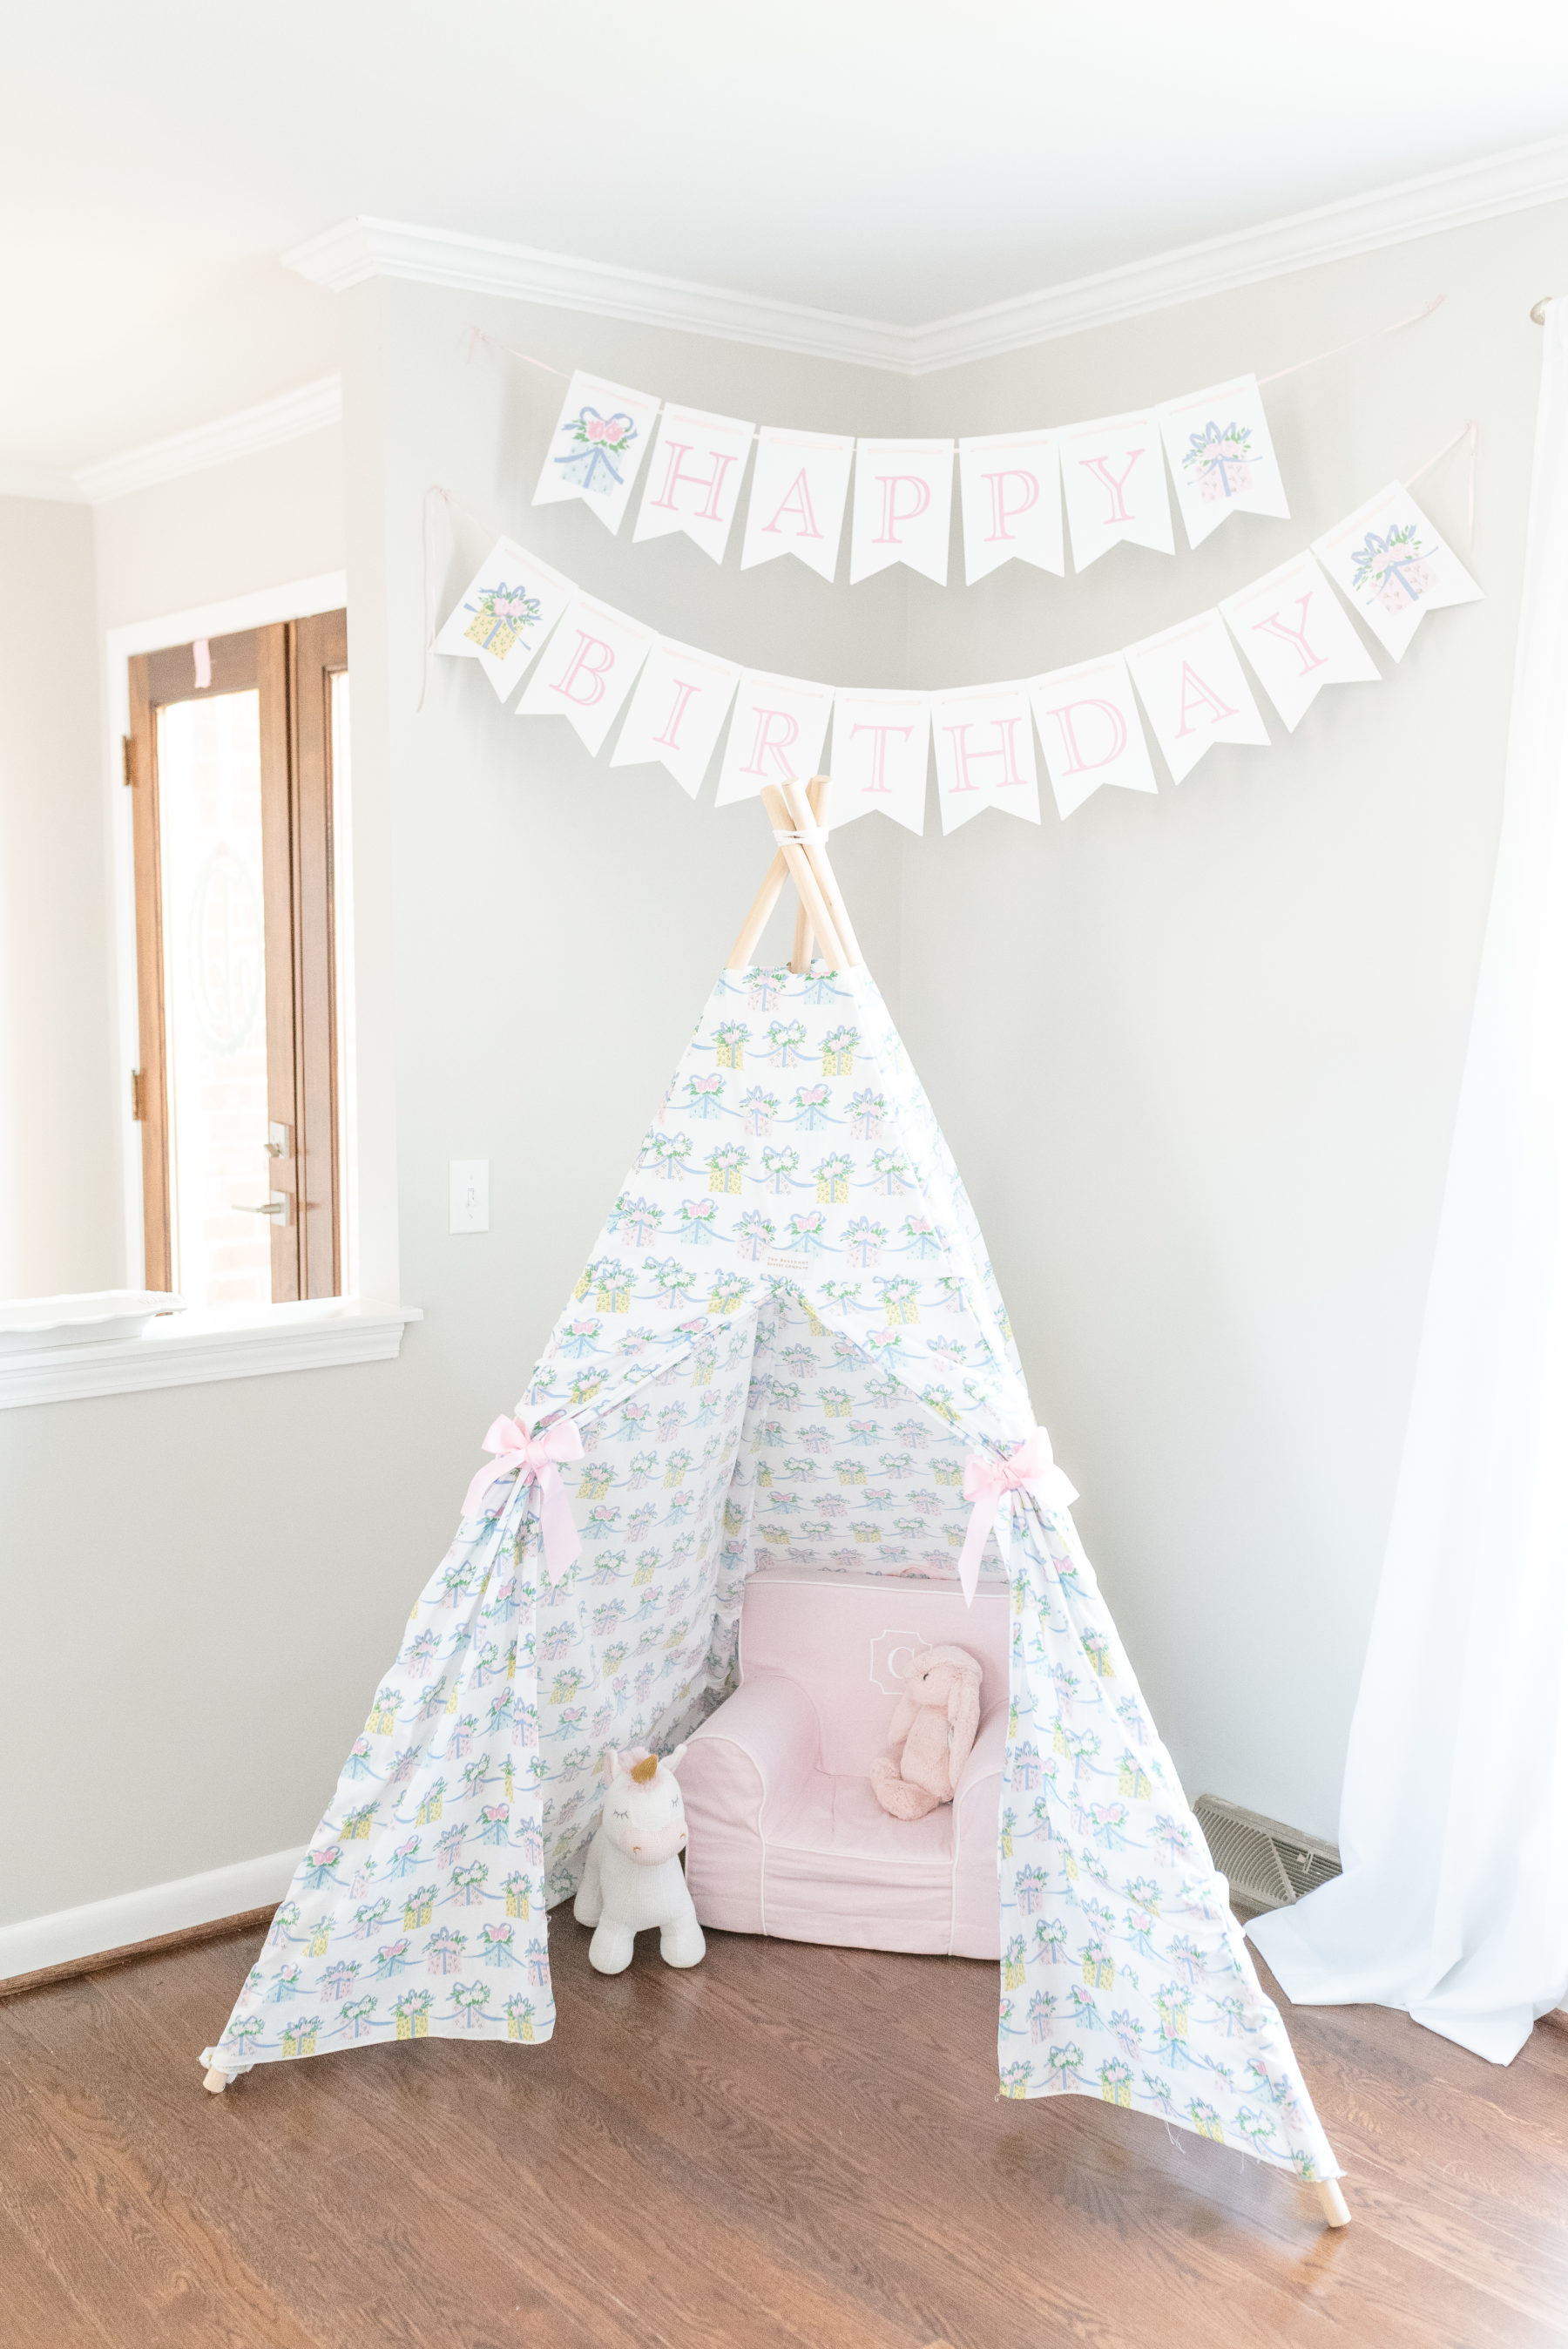 Gorgeous Pastel 1st Birthday Party featured on Nashville Baby Guide